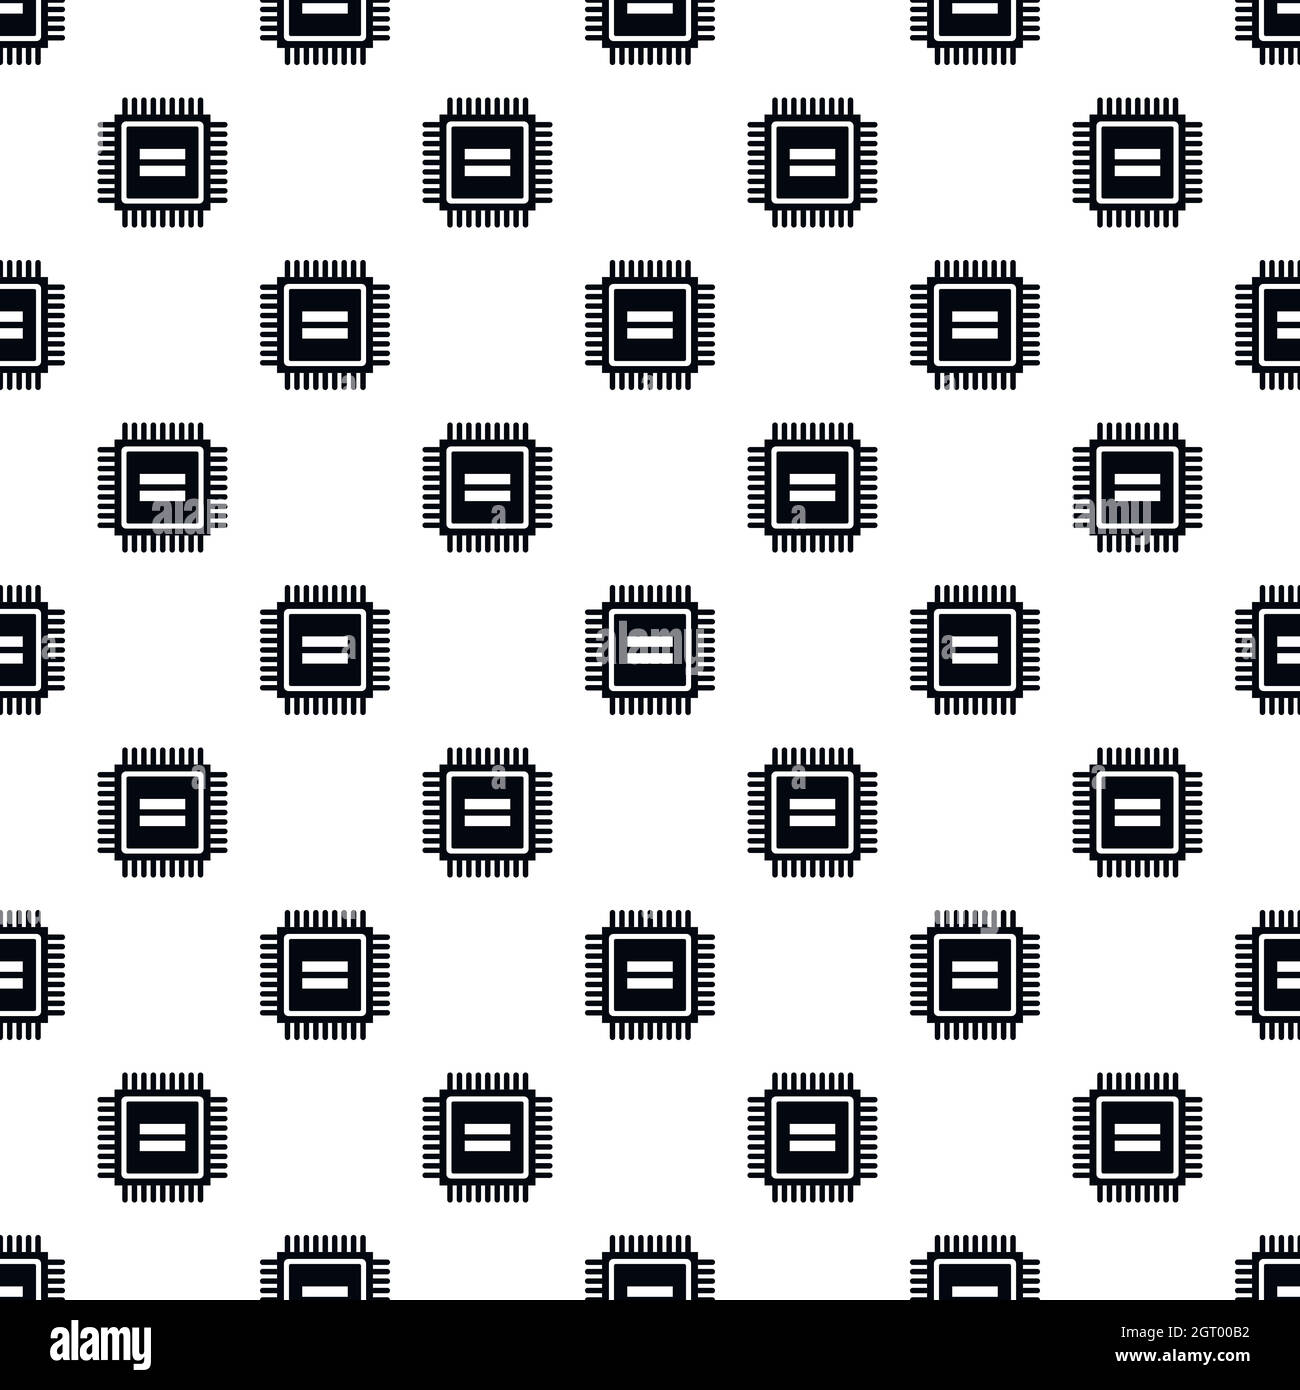 Processor pattern, simple style Stock Vector